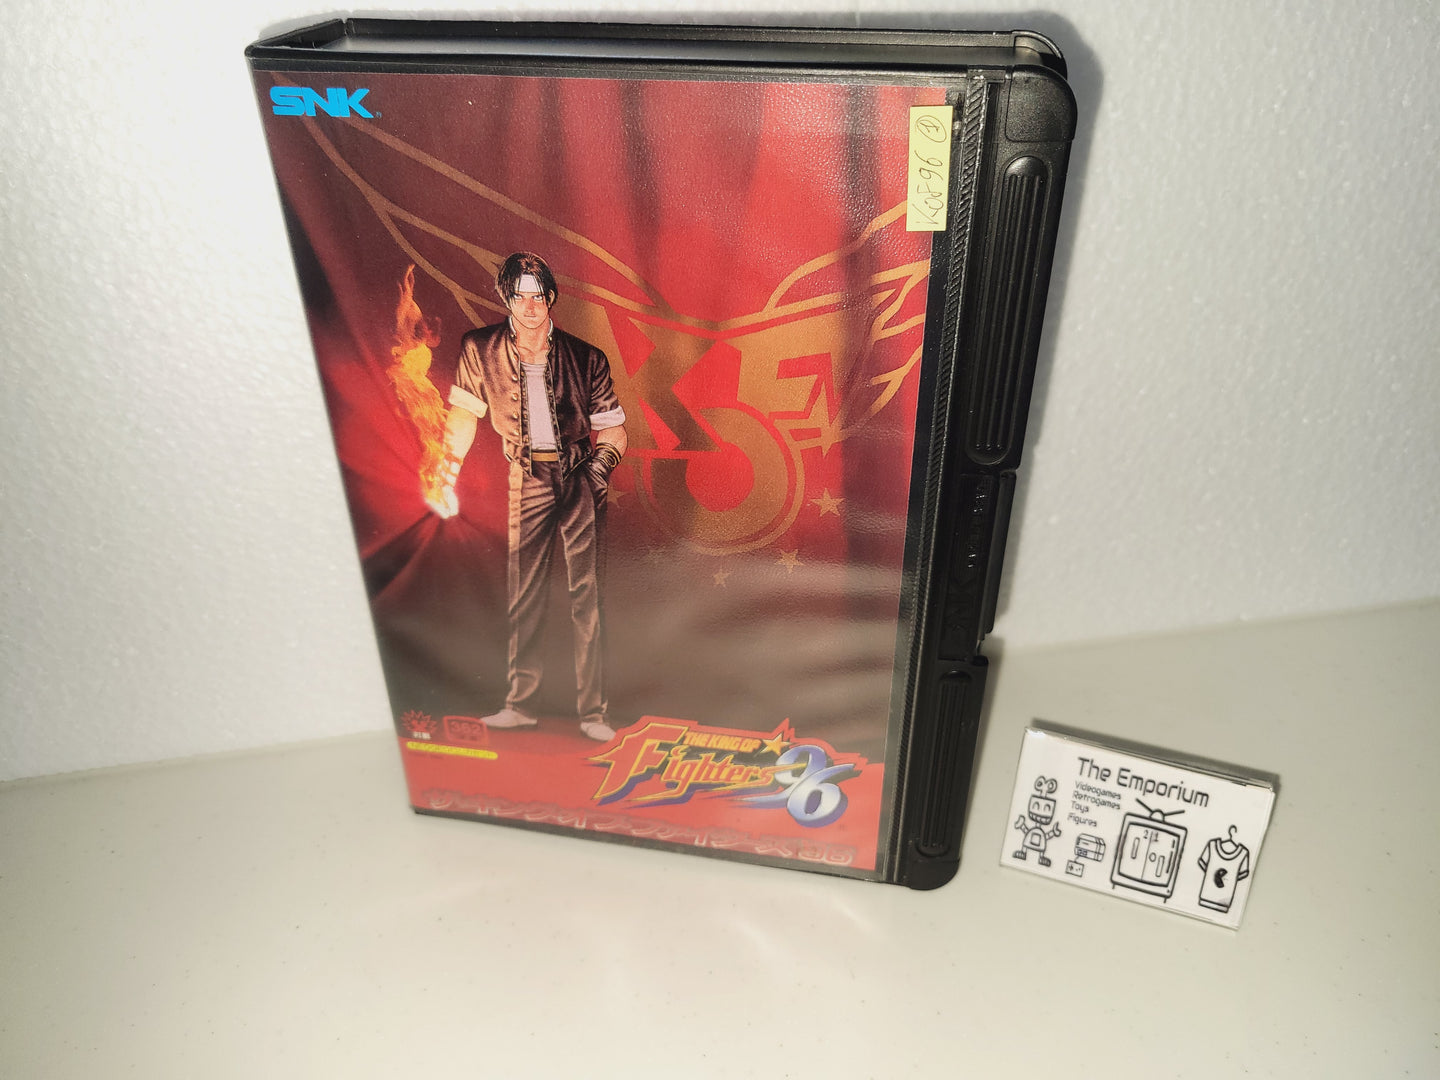 The King of Fighters 96 - Snk Neogeo AES NG